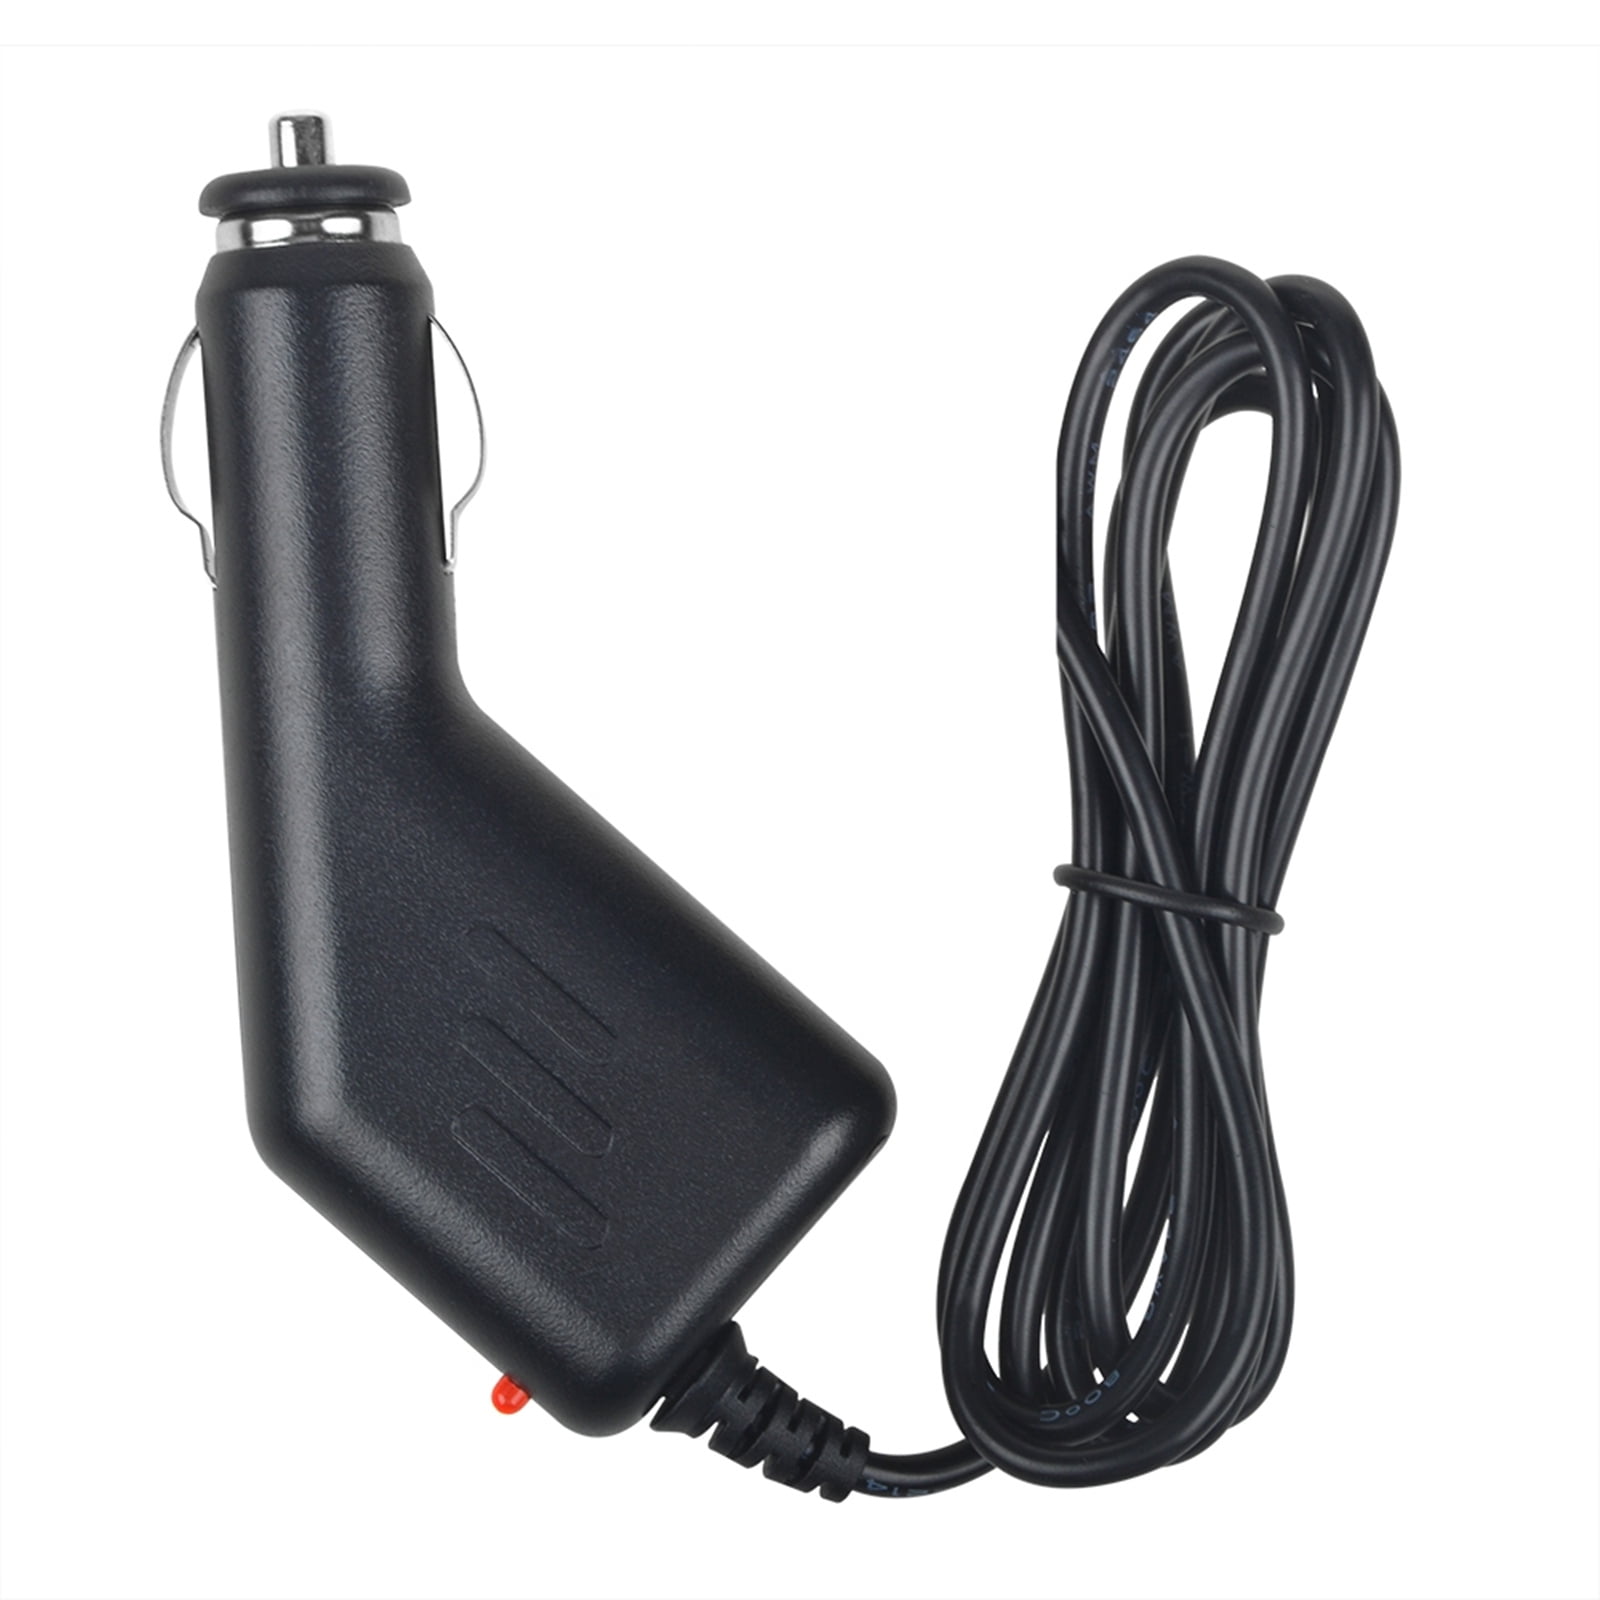 DC Car Adapter Power Charger Cable Cord for Rand McNally TND 80 TNDT80 Tablet PC 